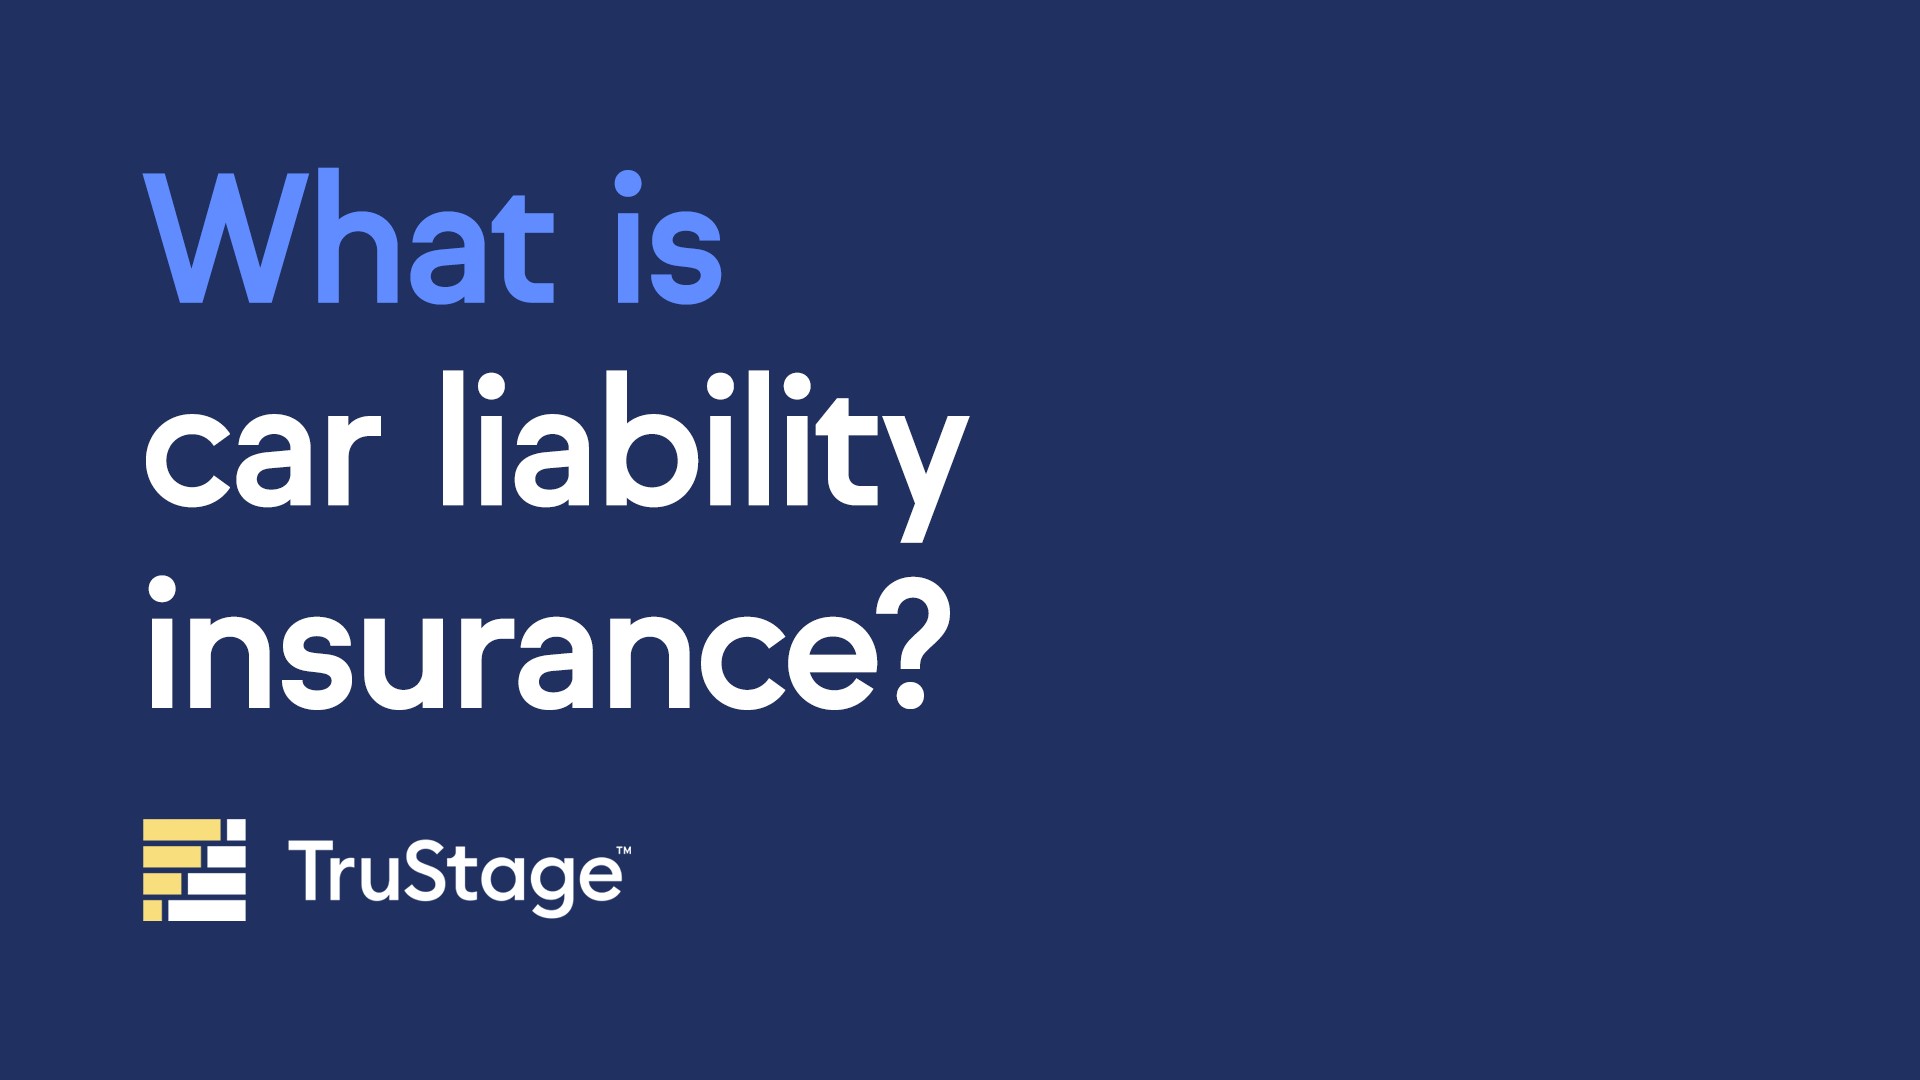 What is car liability insurance?